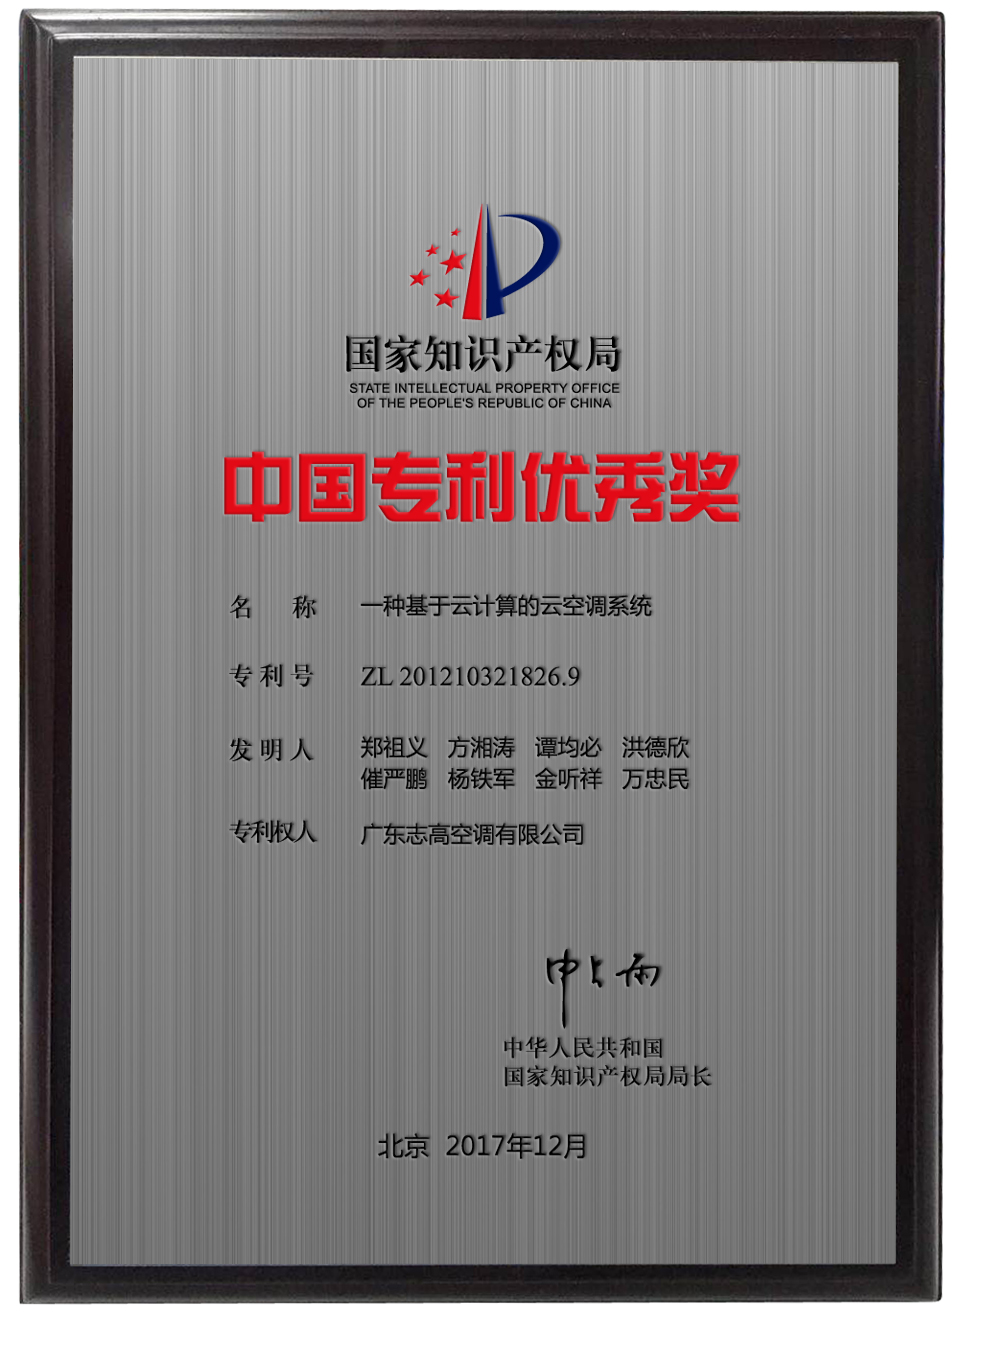 19th China Patent Excellence Award